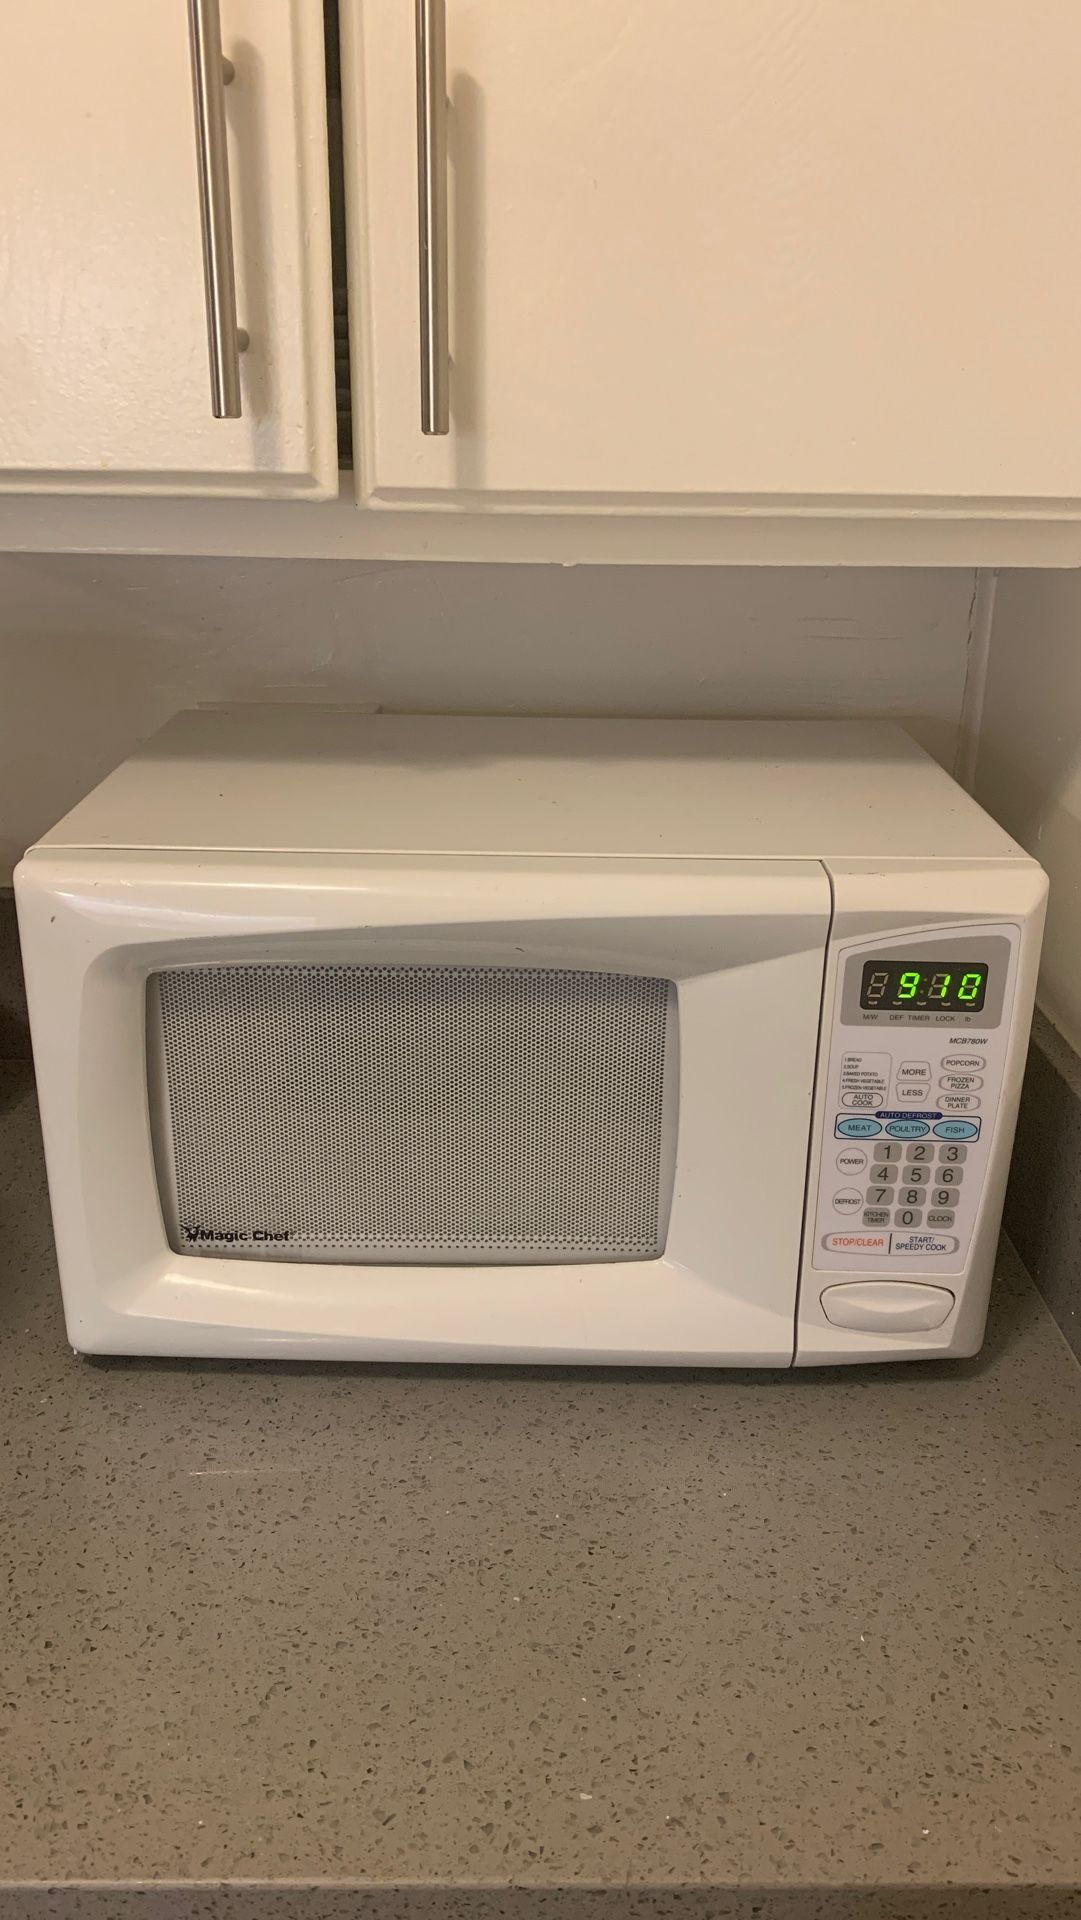 Magic Chef Microwave in Working Condition